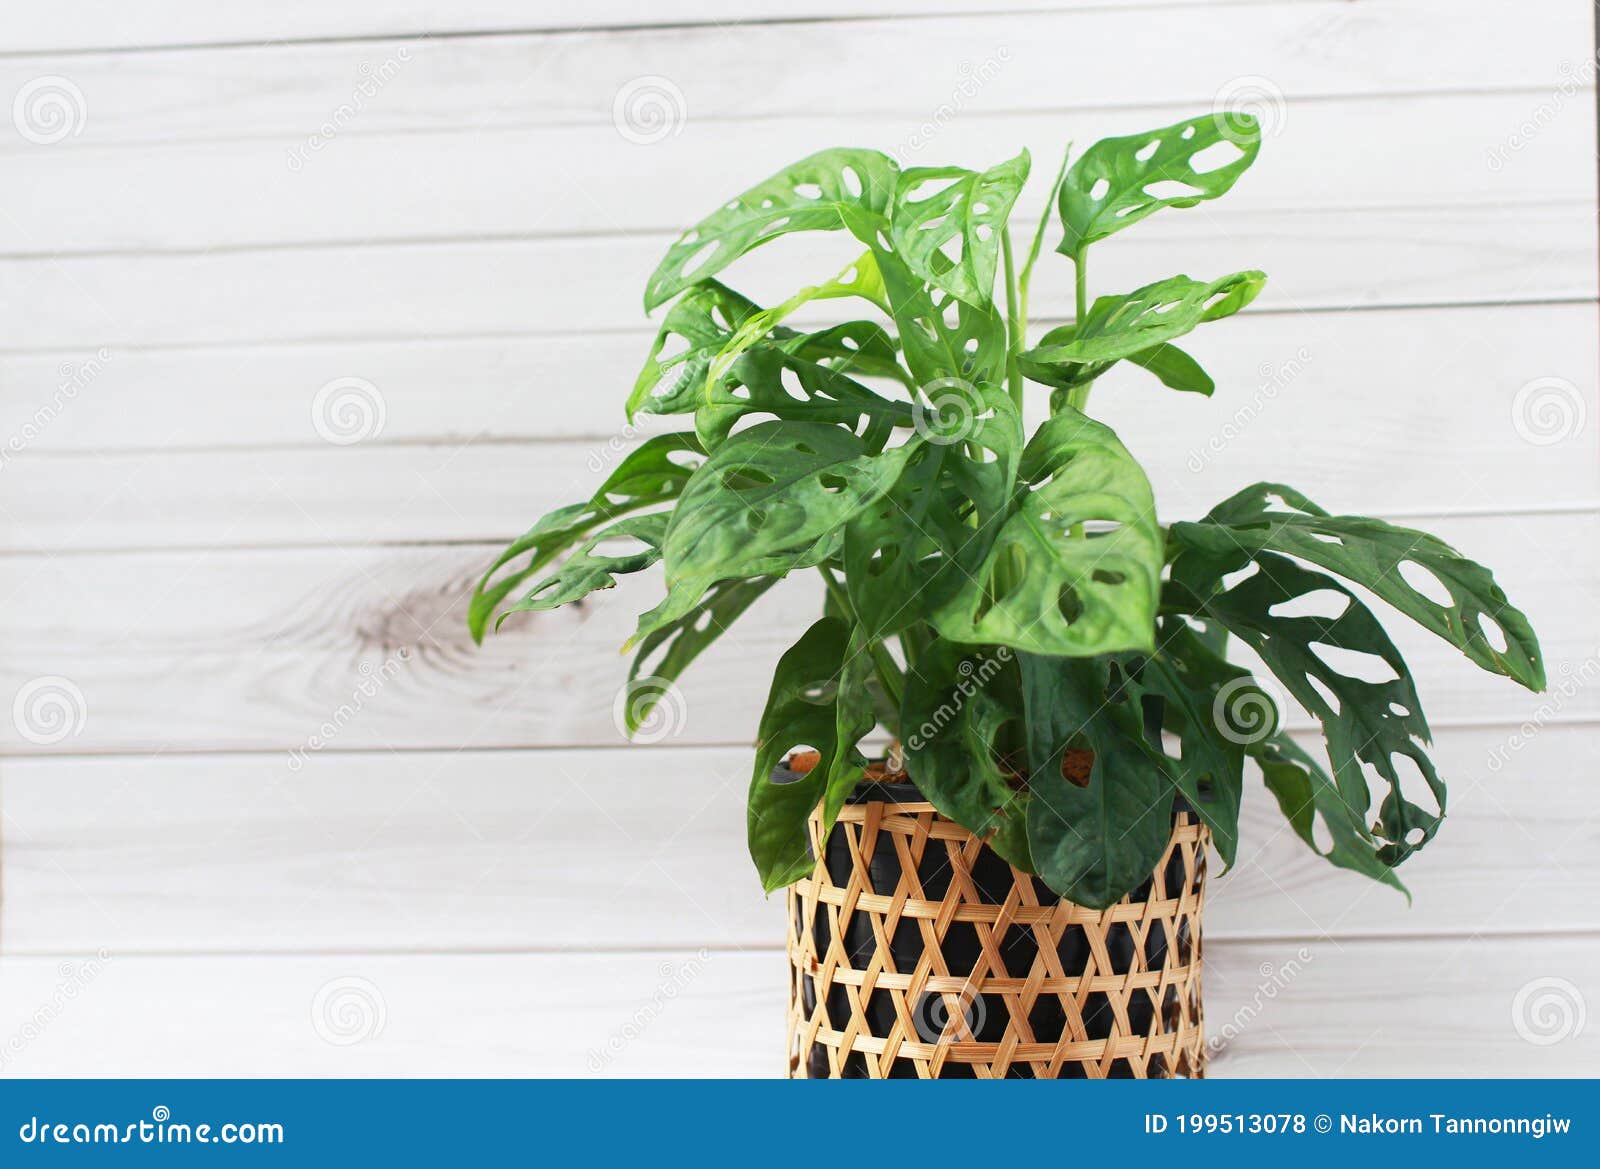 monstera deliciosa and monstera monkey mask in woven bamboo pots